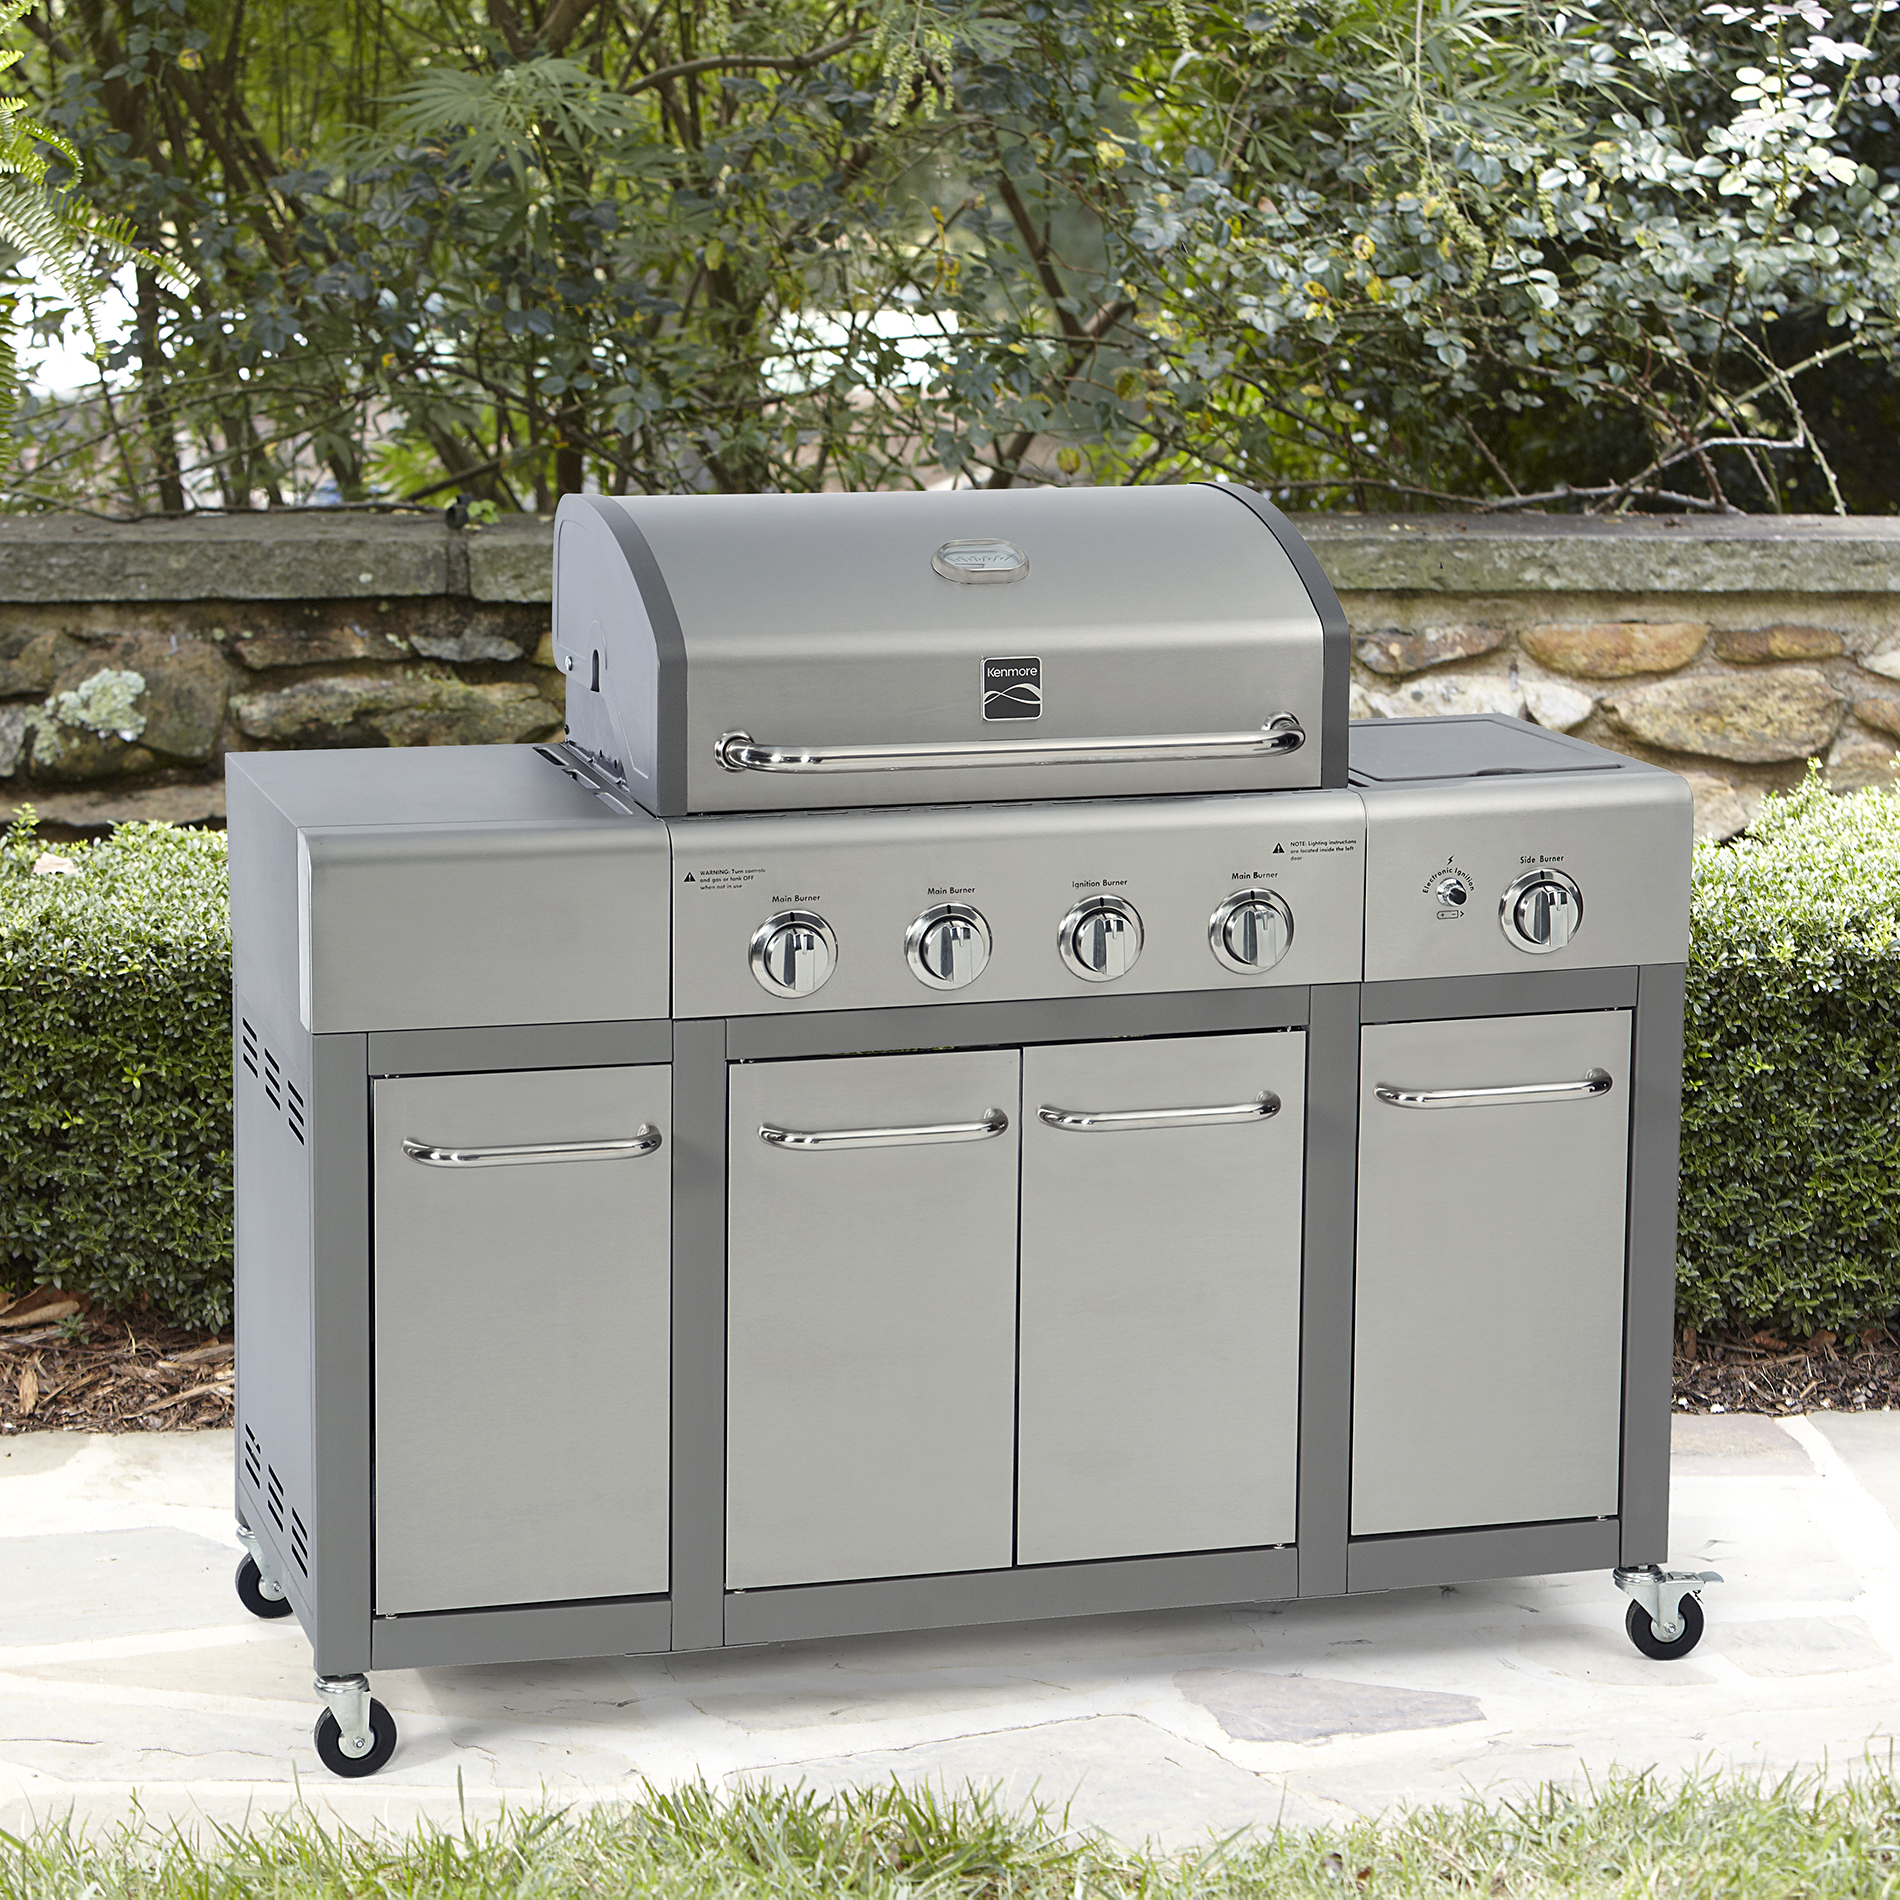 Kenmore 4 Burner Gas Grill with Storage